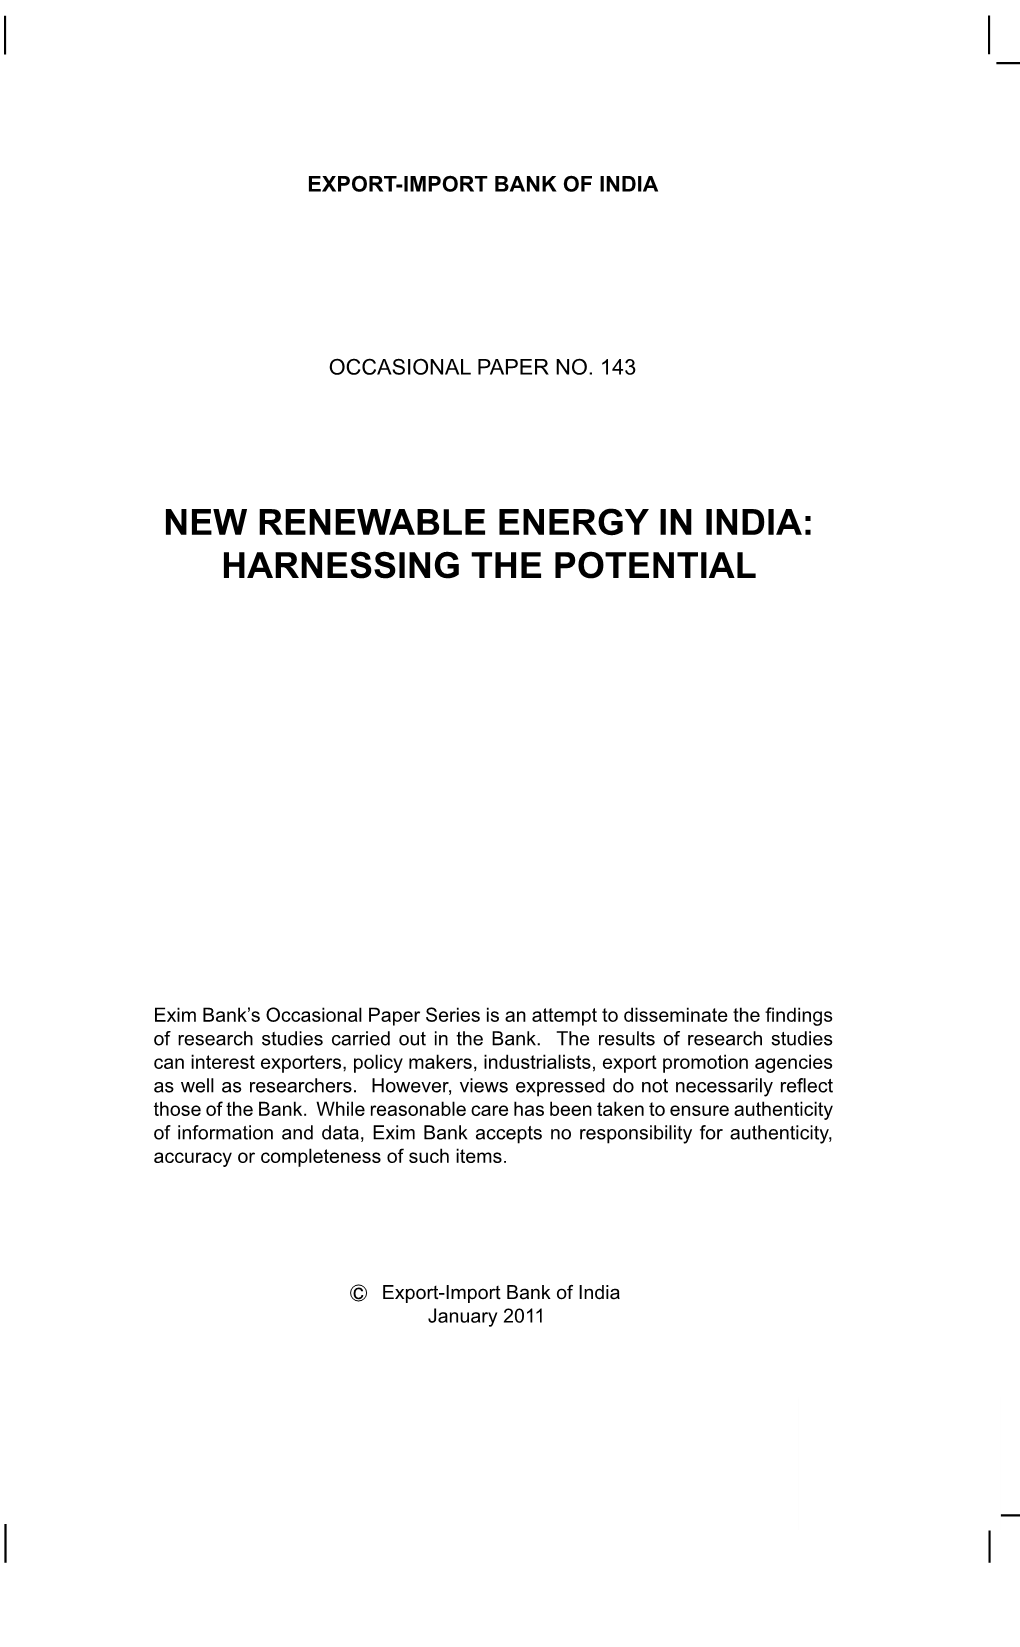 New Renewable Energy in India: Harnessing the Potential